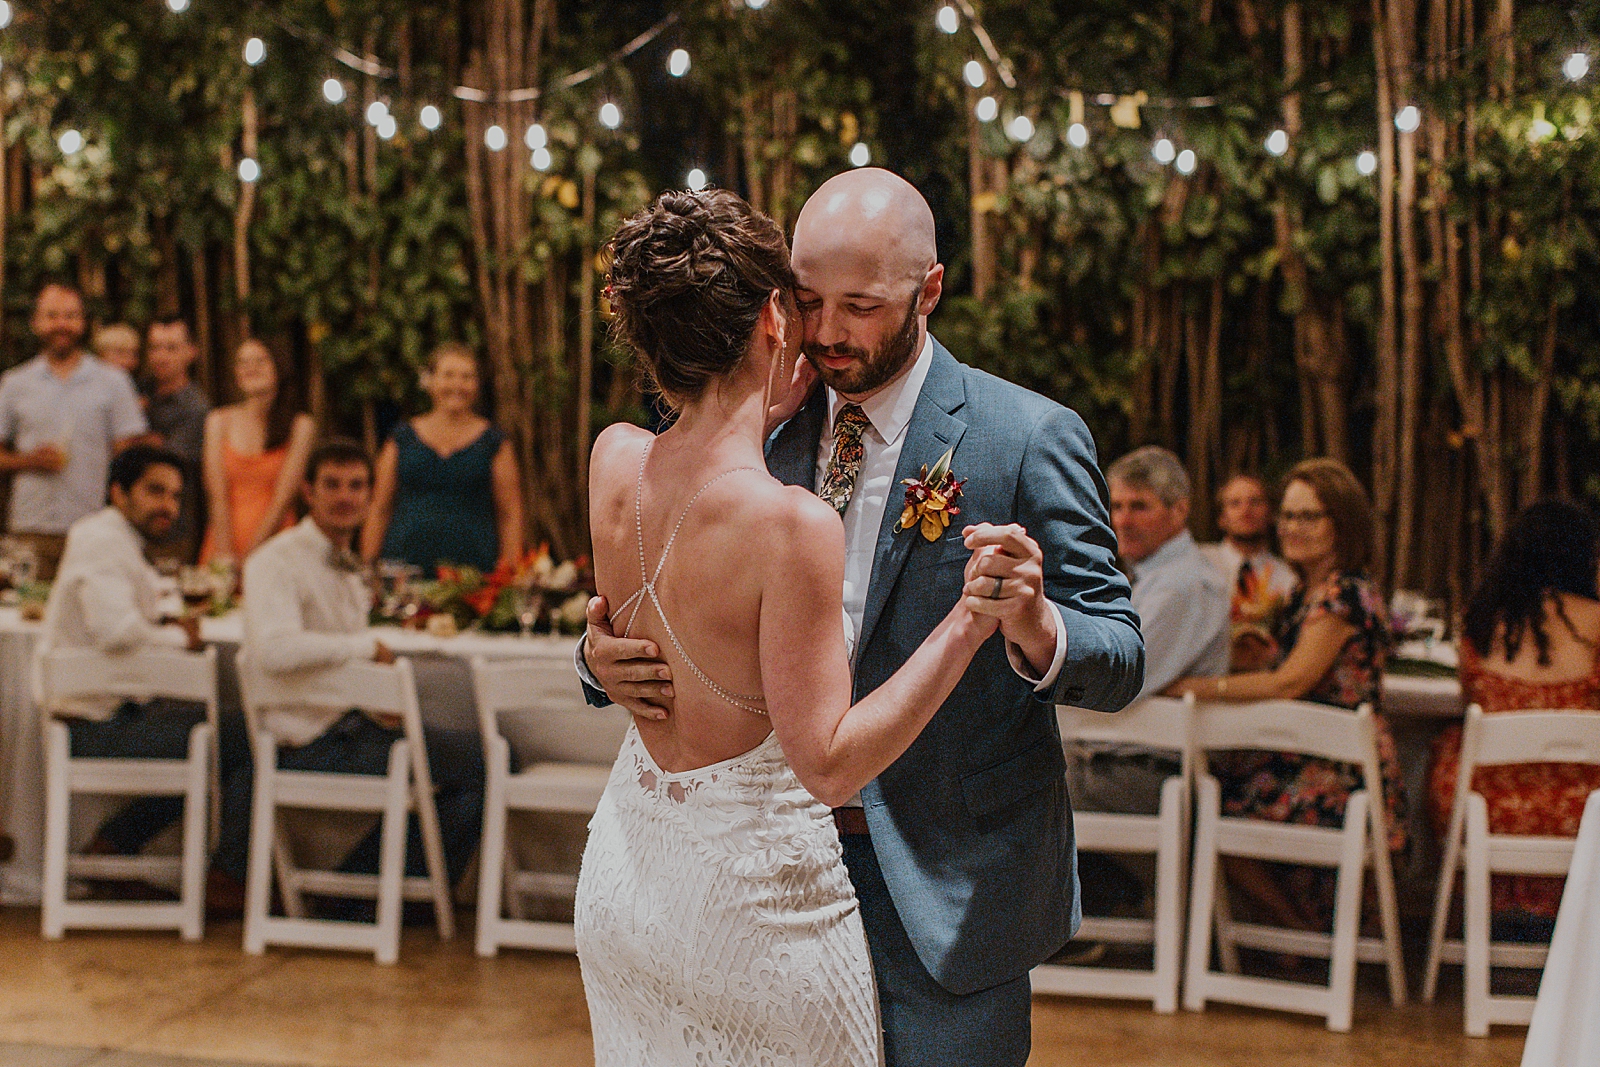 Bride and Groom dancing for first dance during outdoor Reception